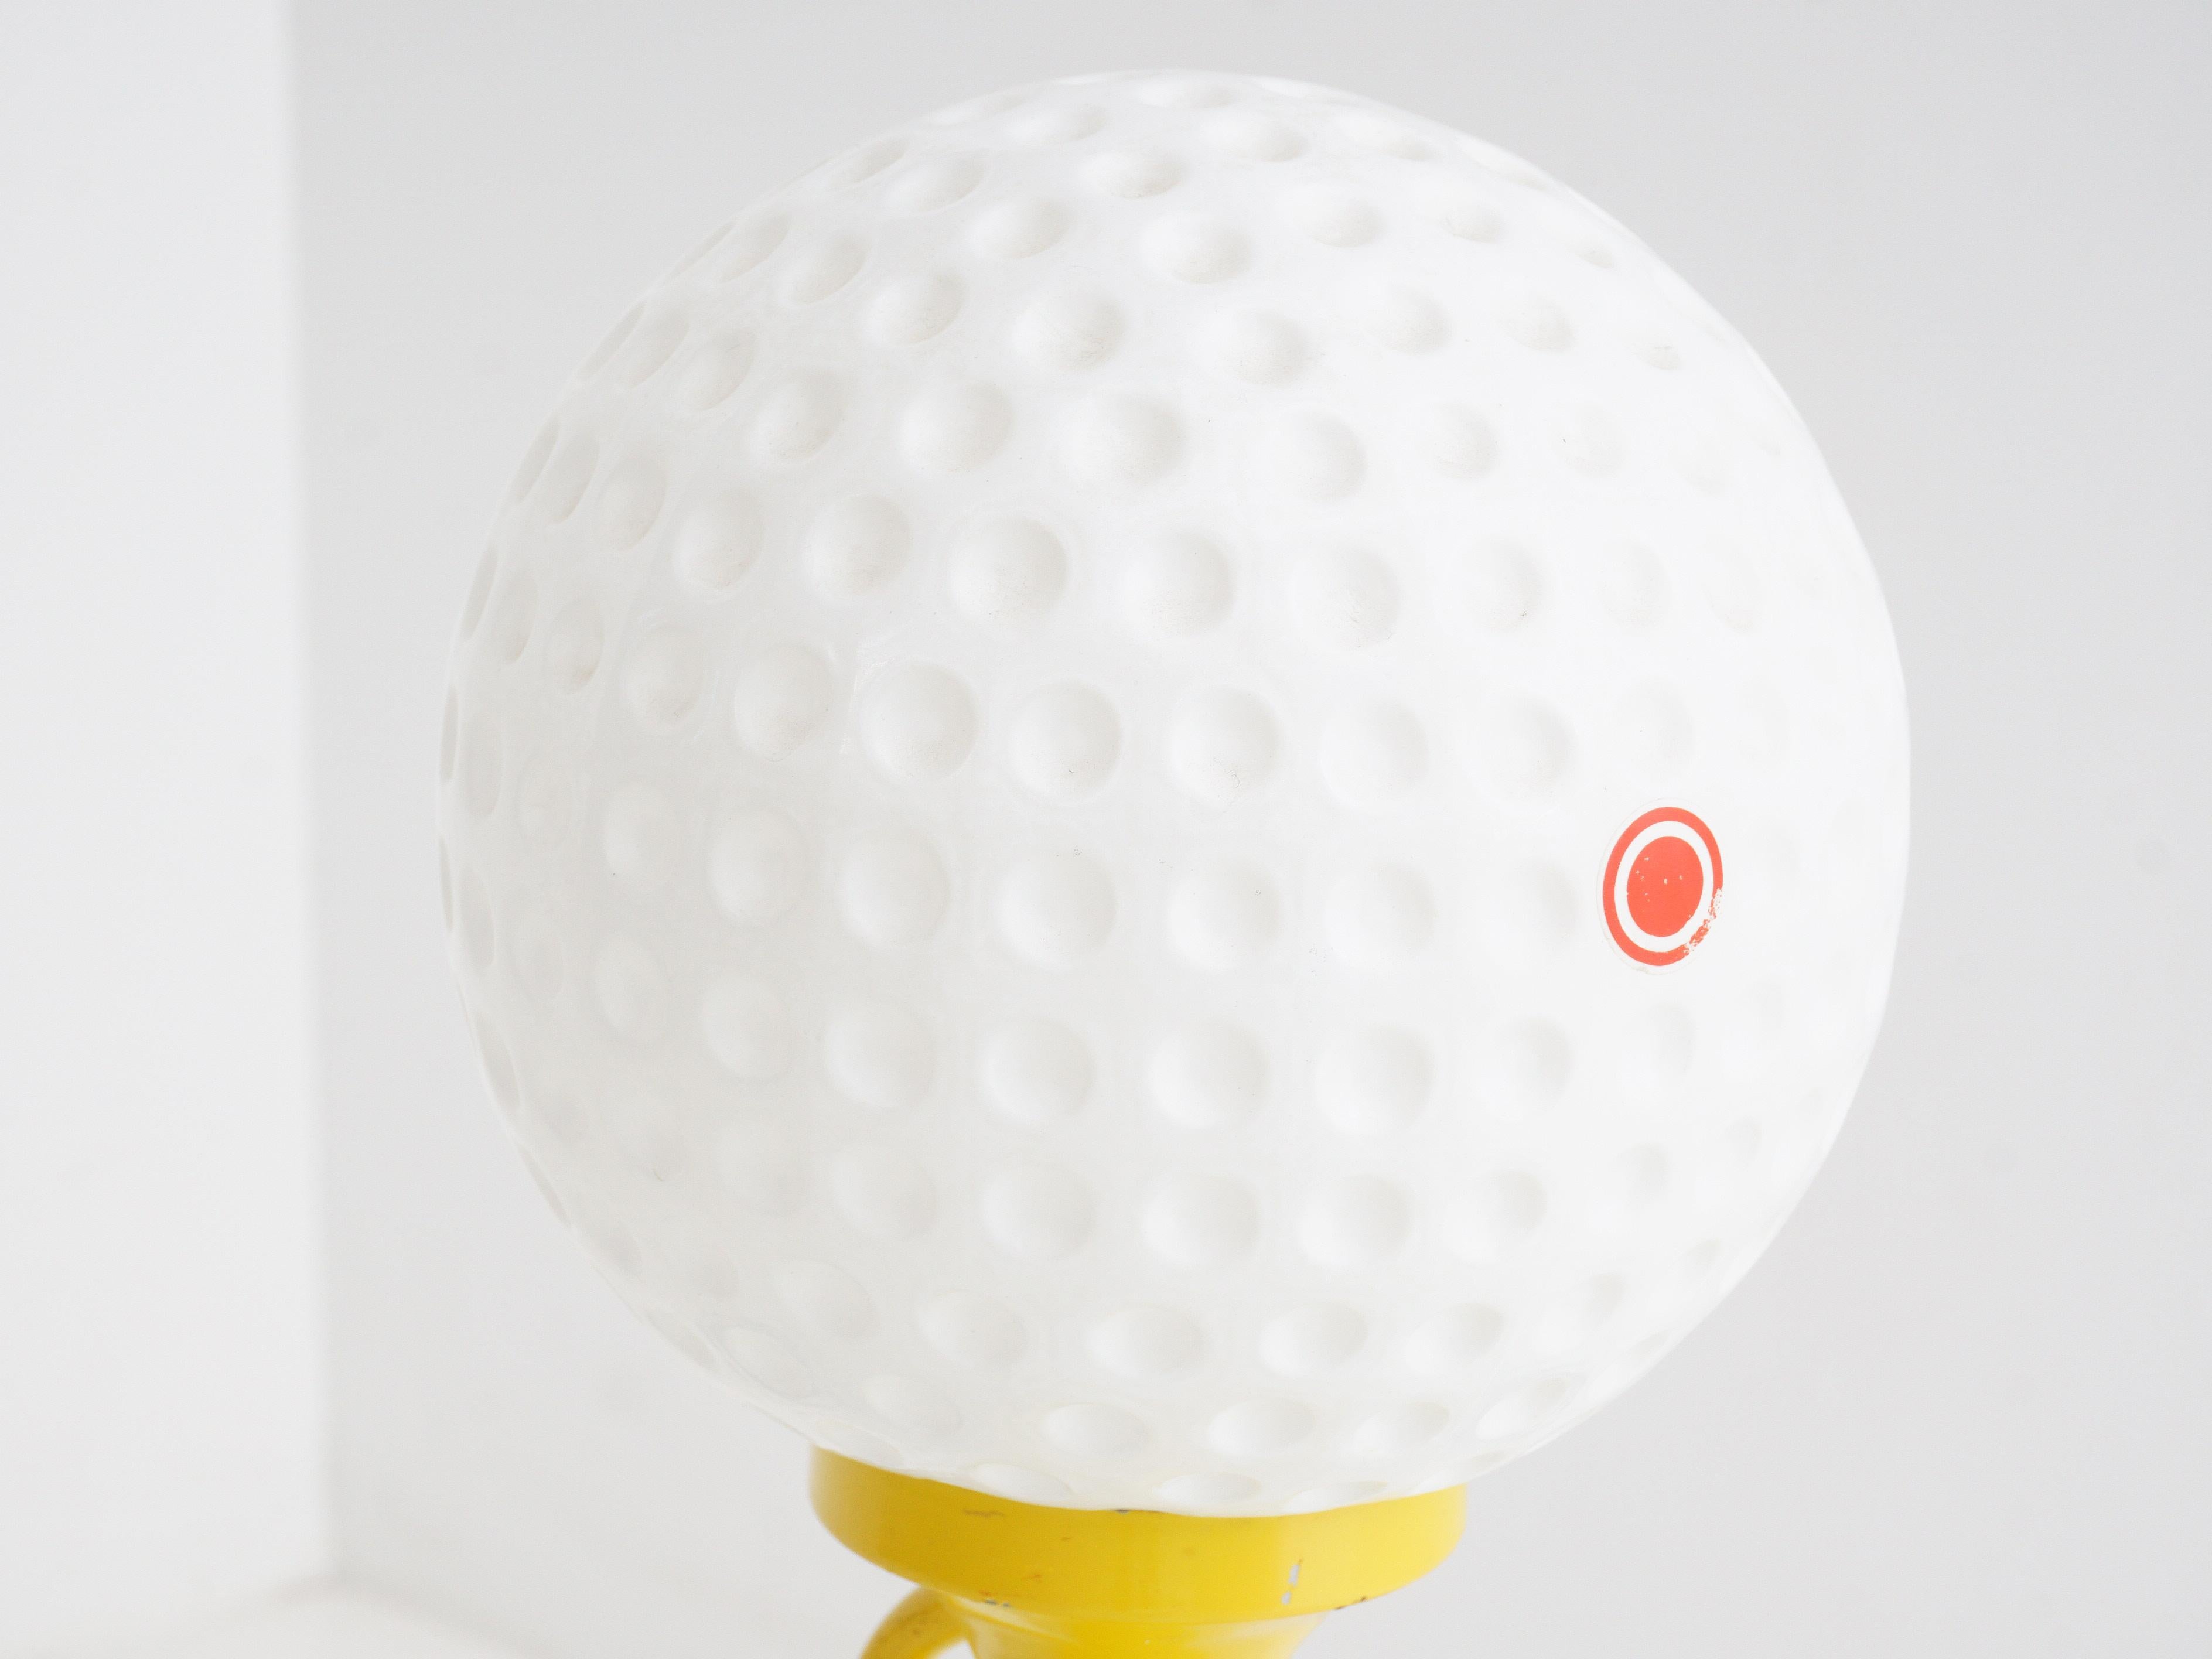 Tee off your décor with this lamp that's as stylish as your swing. With a golf ball-shaped shade perched on a tee, it's a bright idea that's par for the course.

- 16.5